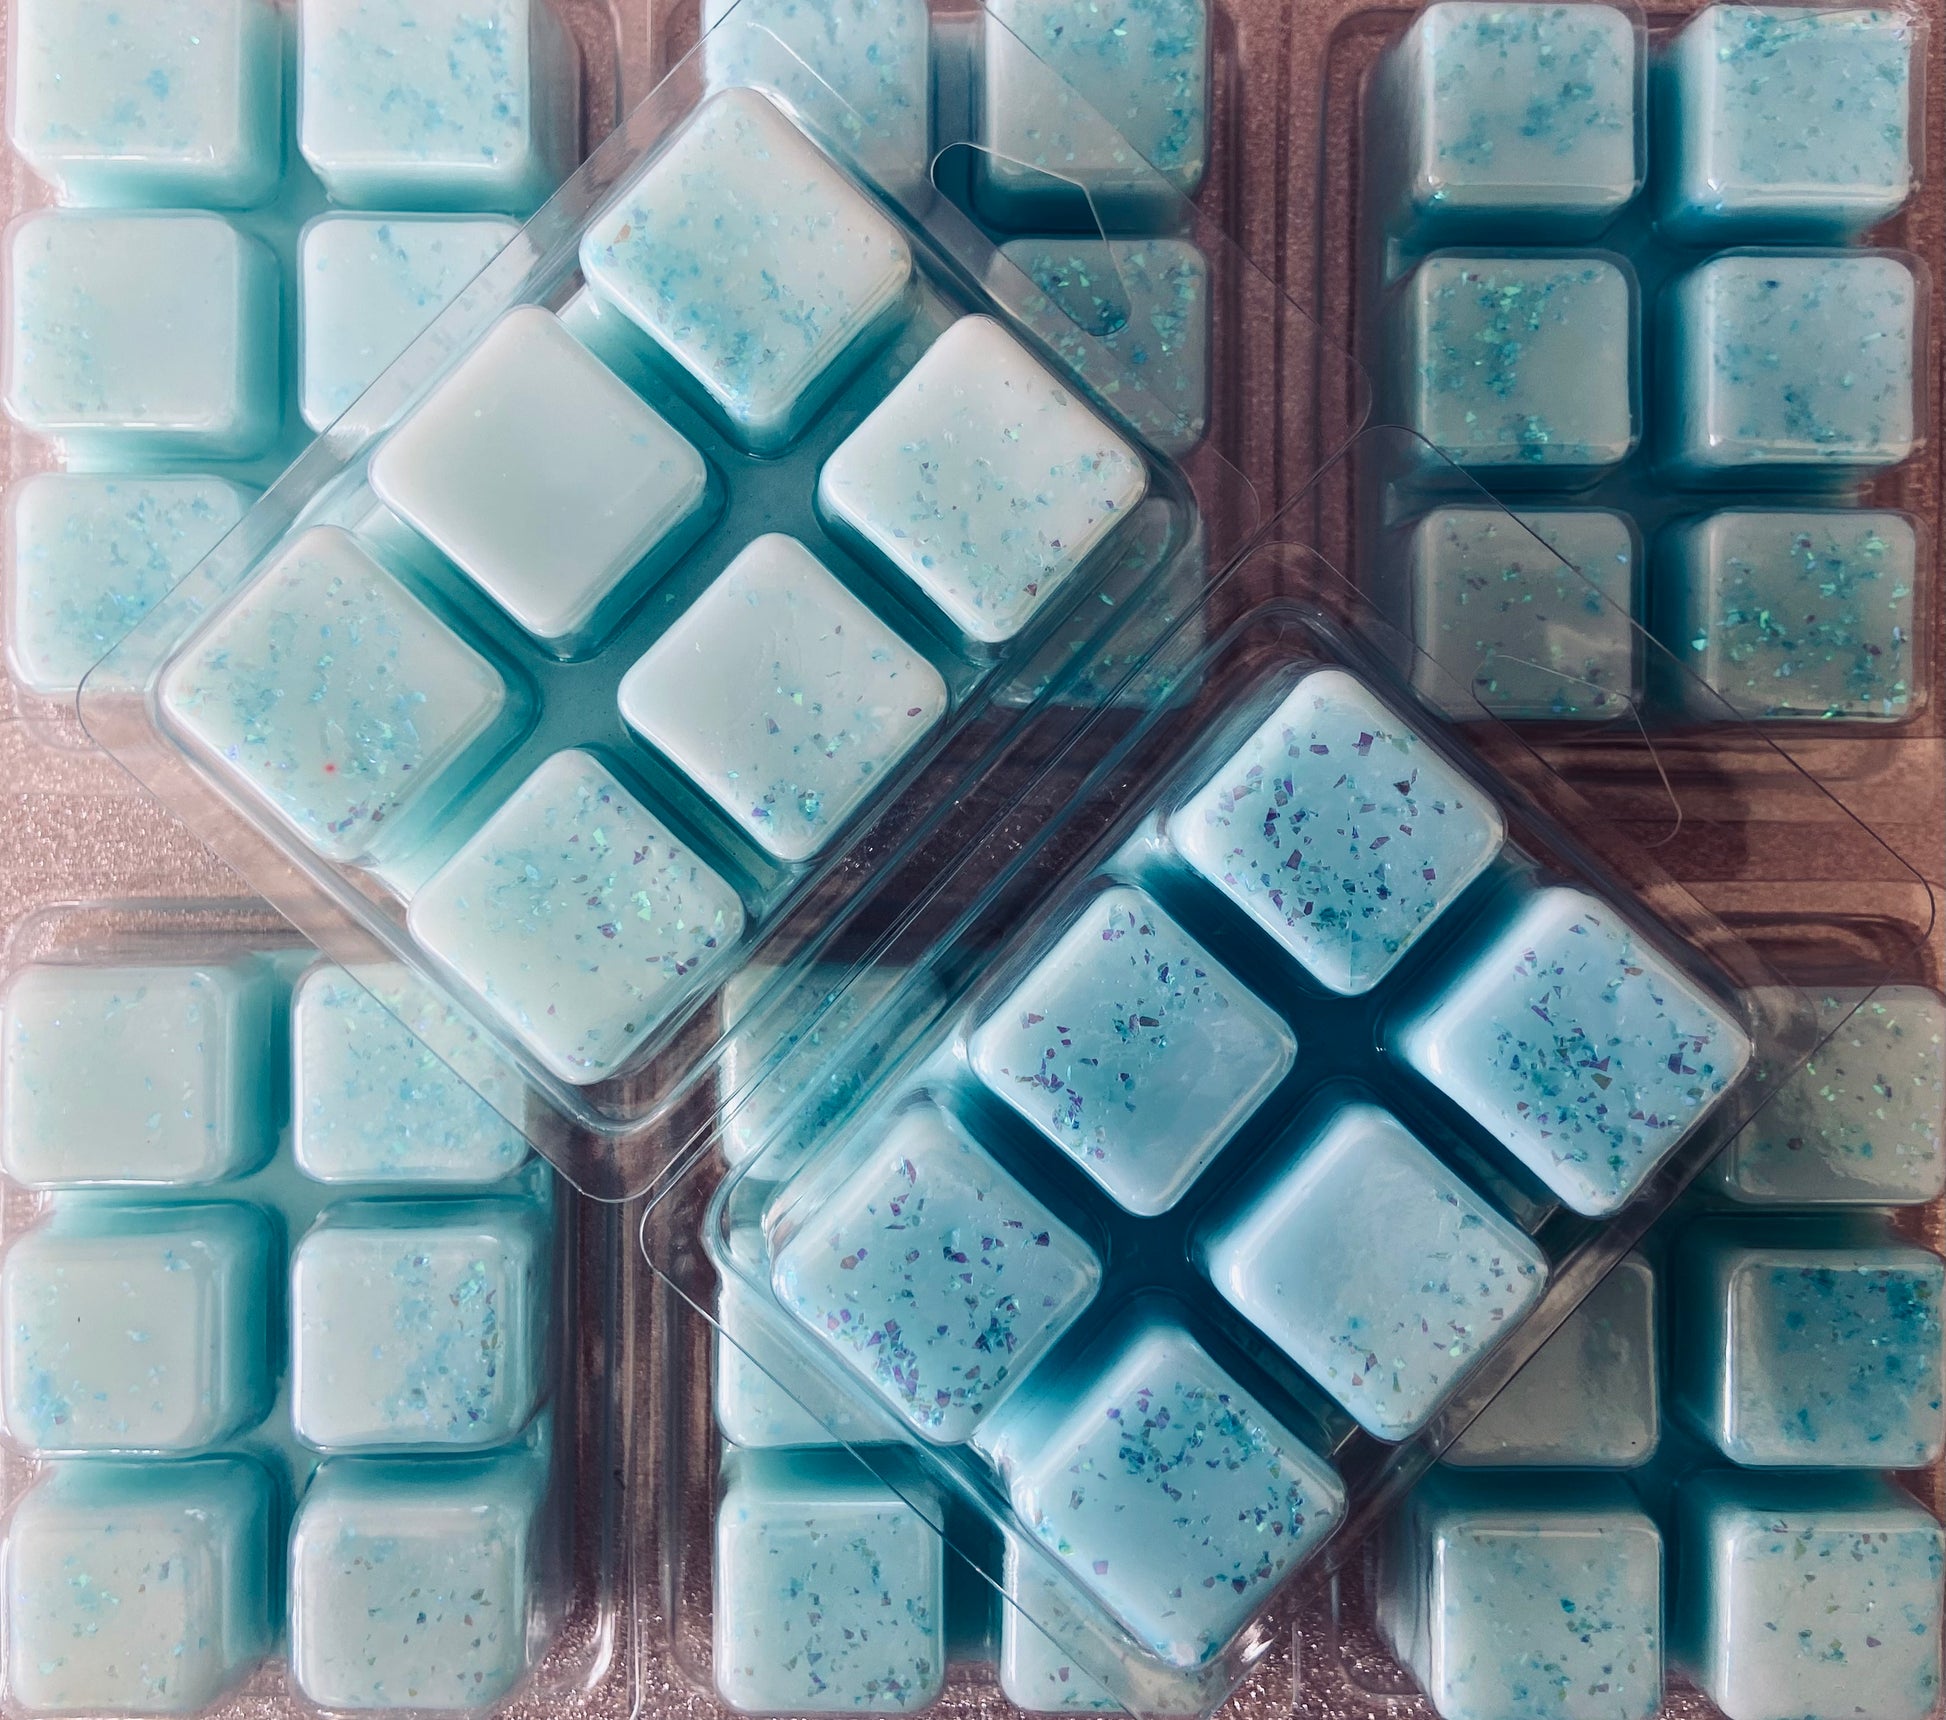 Packaged Sauvage Aftershave Inspired wax melts in various shades of blue with speckled details by The Soap Gals.